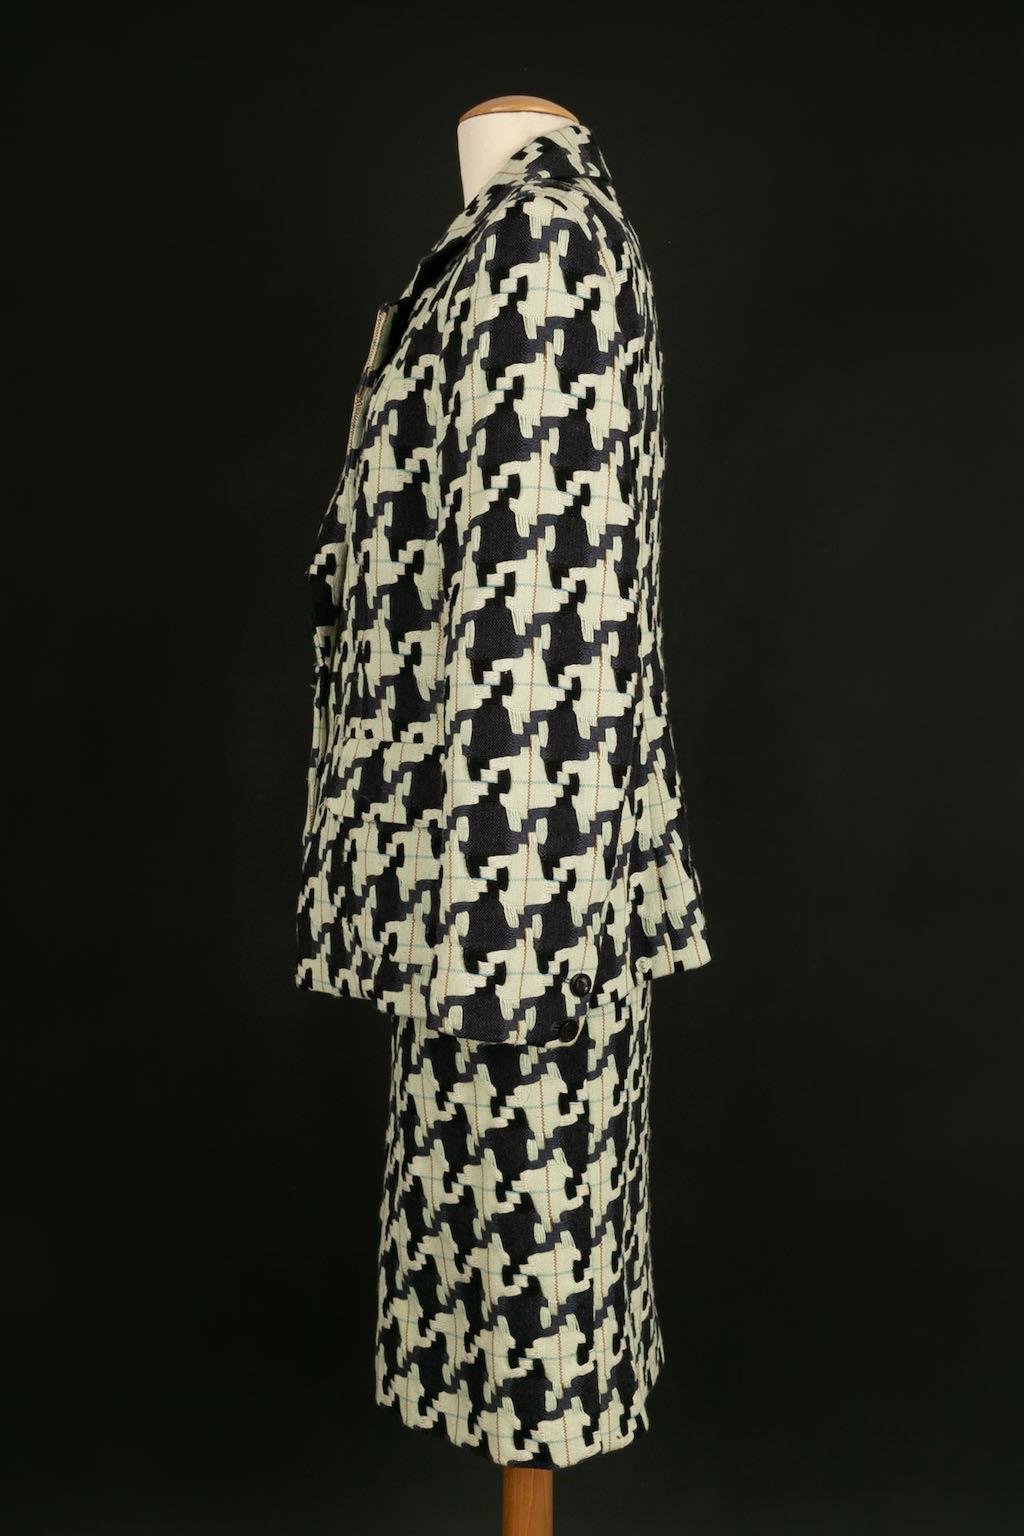 Christian Lacroix - (Made in France) Suit, skirt and jacket in wool with houndstooth pattern. Size indicated 48FR.

Additional information:
Condition: Very good condition
Dimensions: Jacket: Shoulder width: 48 cm - Chest: 52cm - Waist: 48 cm -